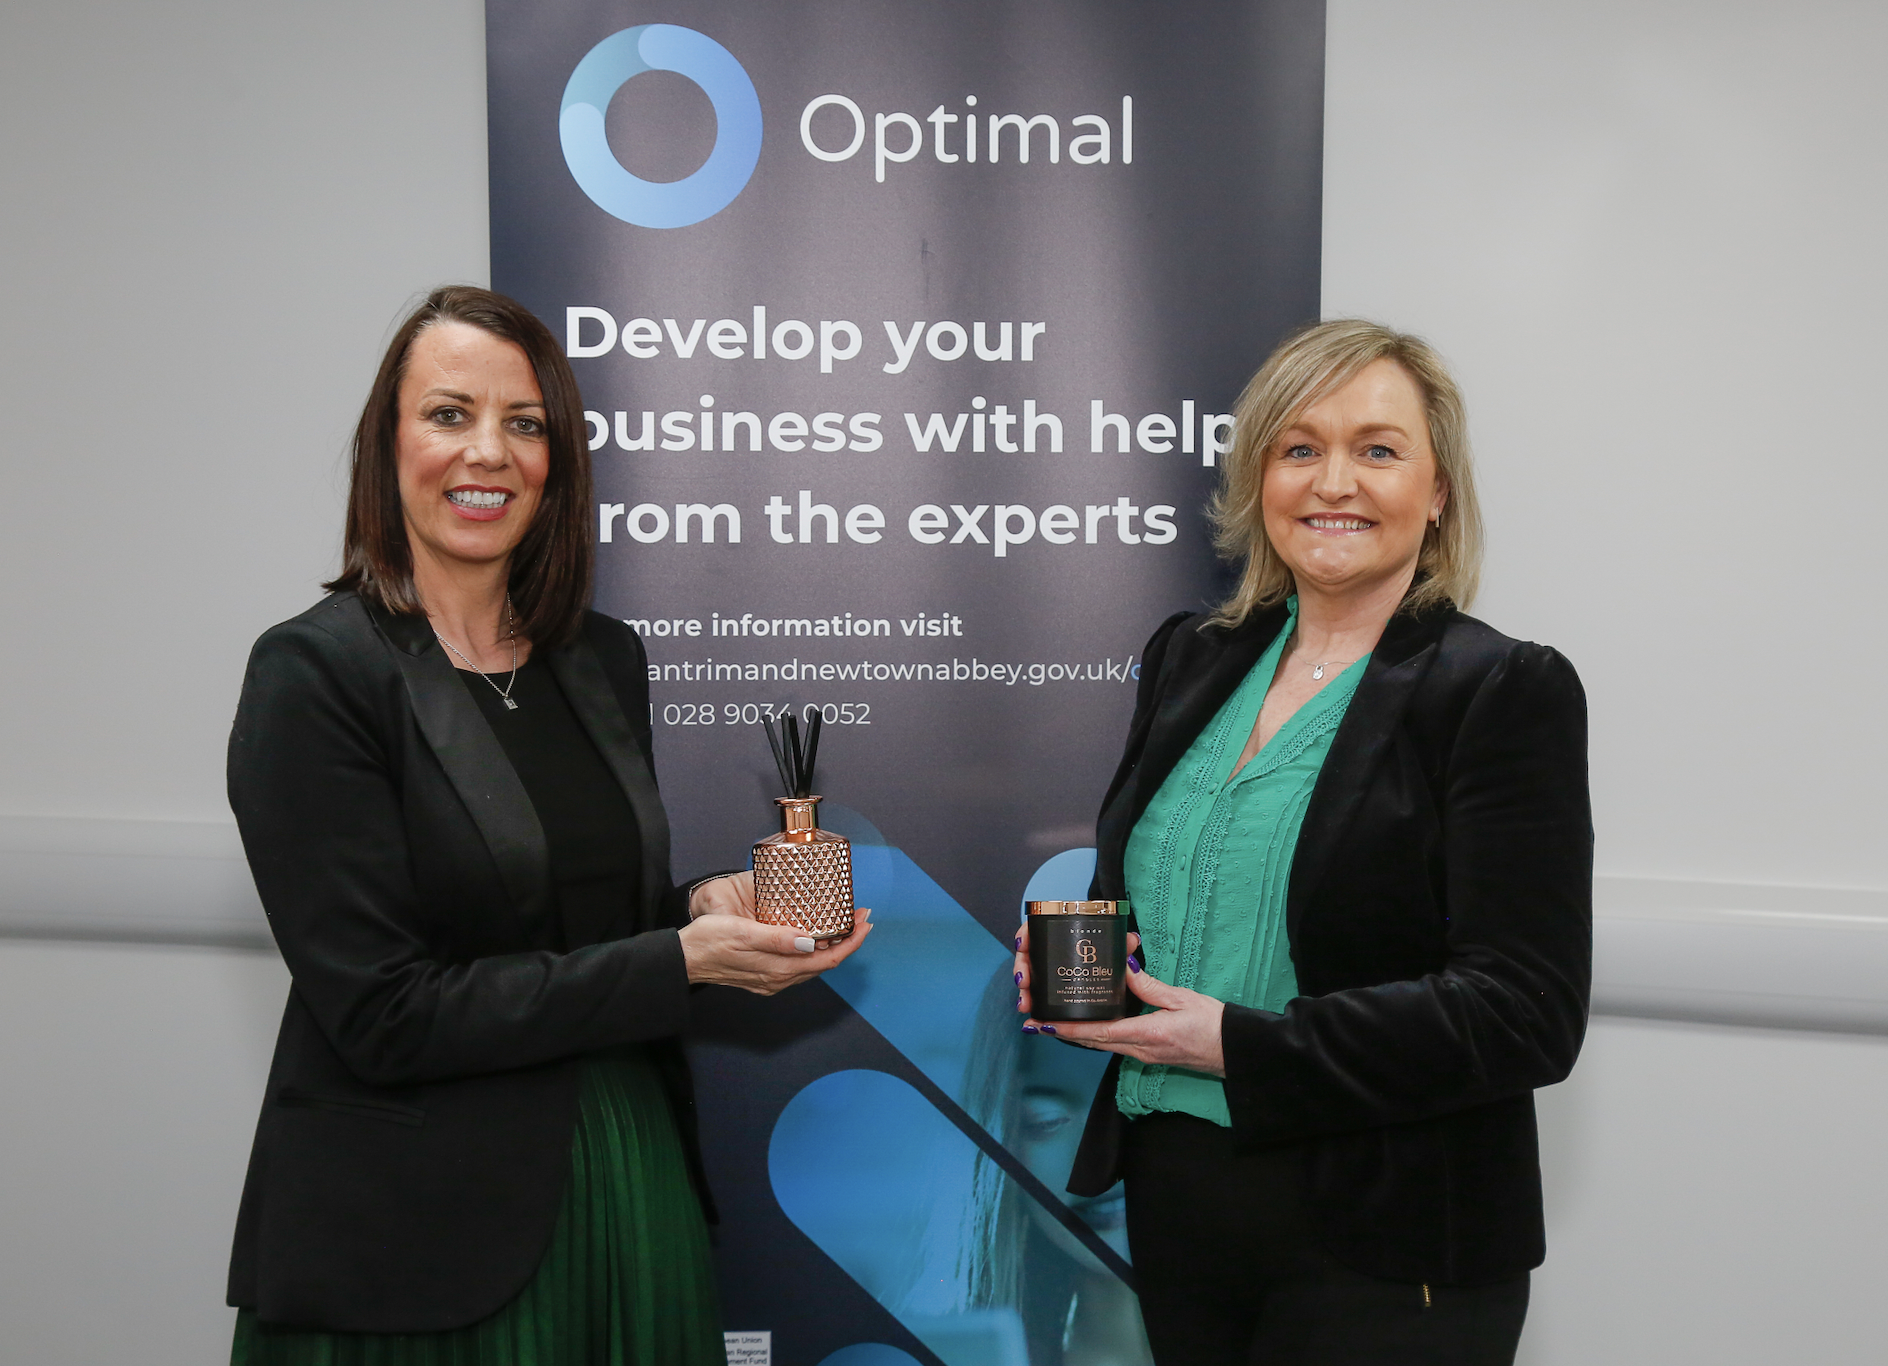 CoCo Bleu Candles founder Clare Getty with Mallusk Enterprise Park Business Adviser Louise Parkes who mentored Clare on the OPTIMAL business growth support programme.